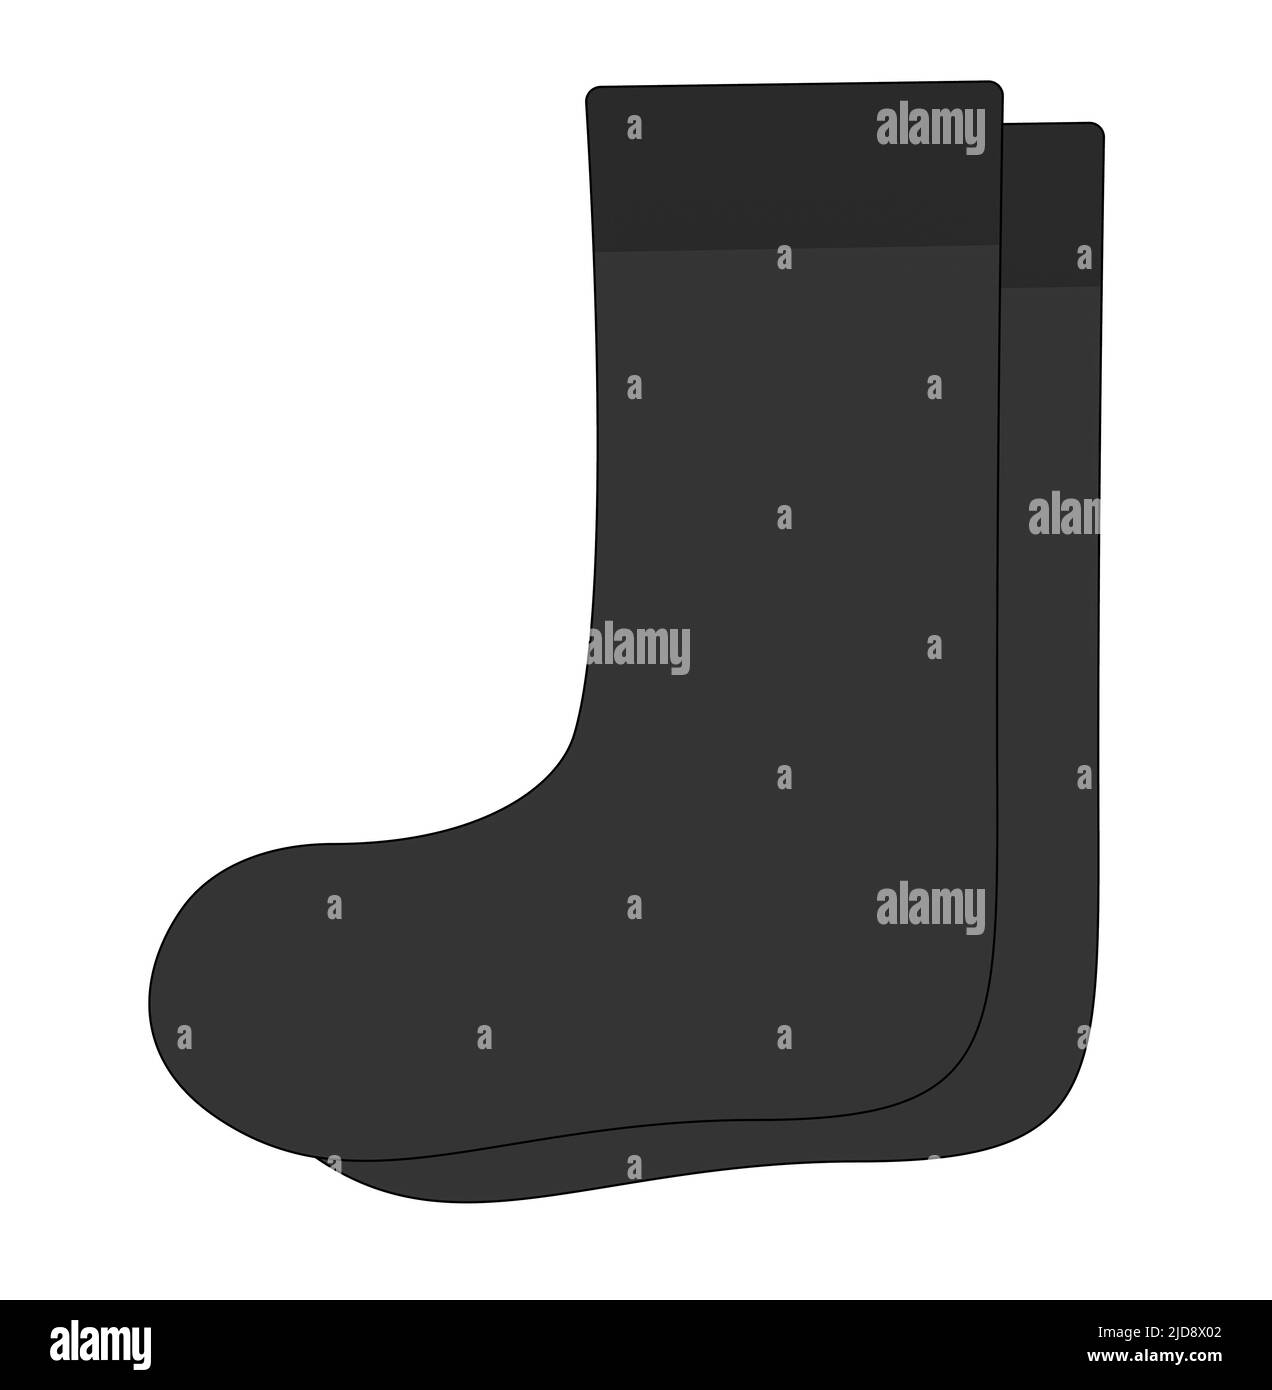 A graphic illustration of A Pair of Black socks for use as an icon, logo or web decoration Stock Photo